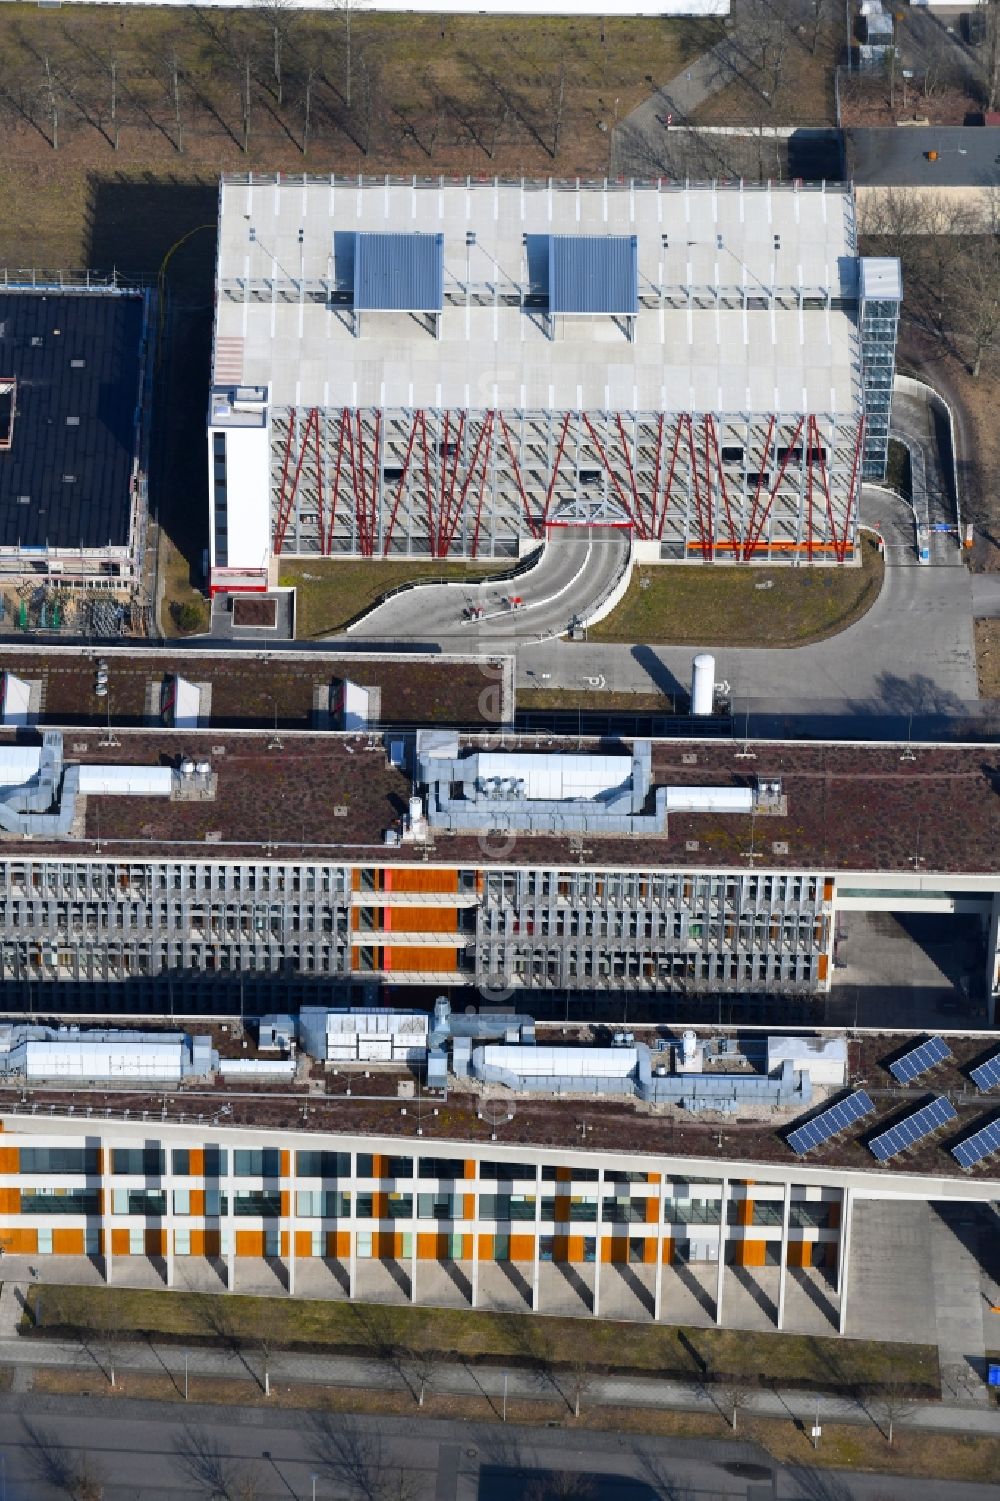 Berlin from above - Office building - Ensemble of Scienion AG on Volmerstrasse in the district Johannesthal in Berlin, Germany